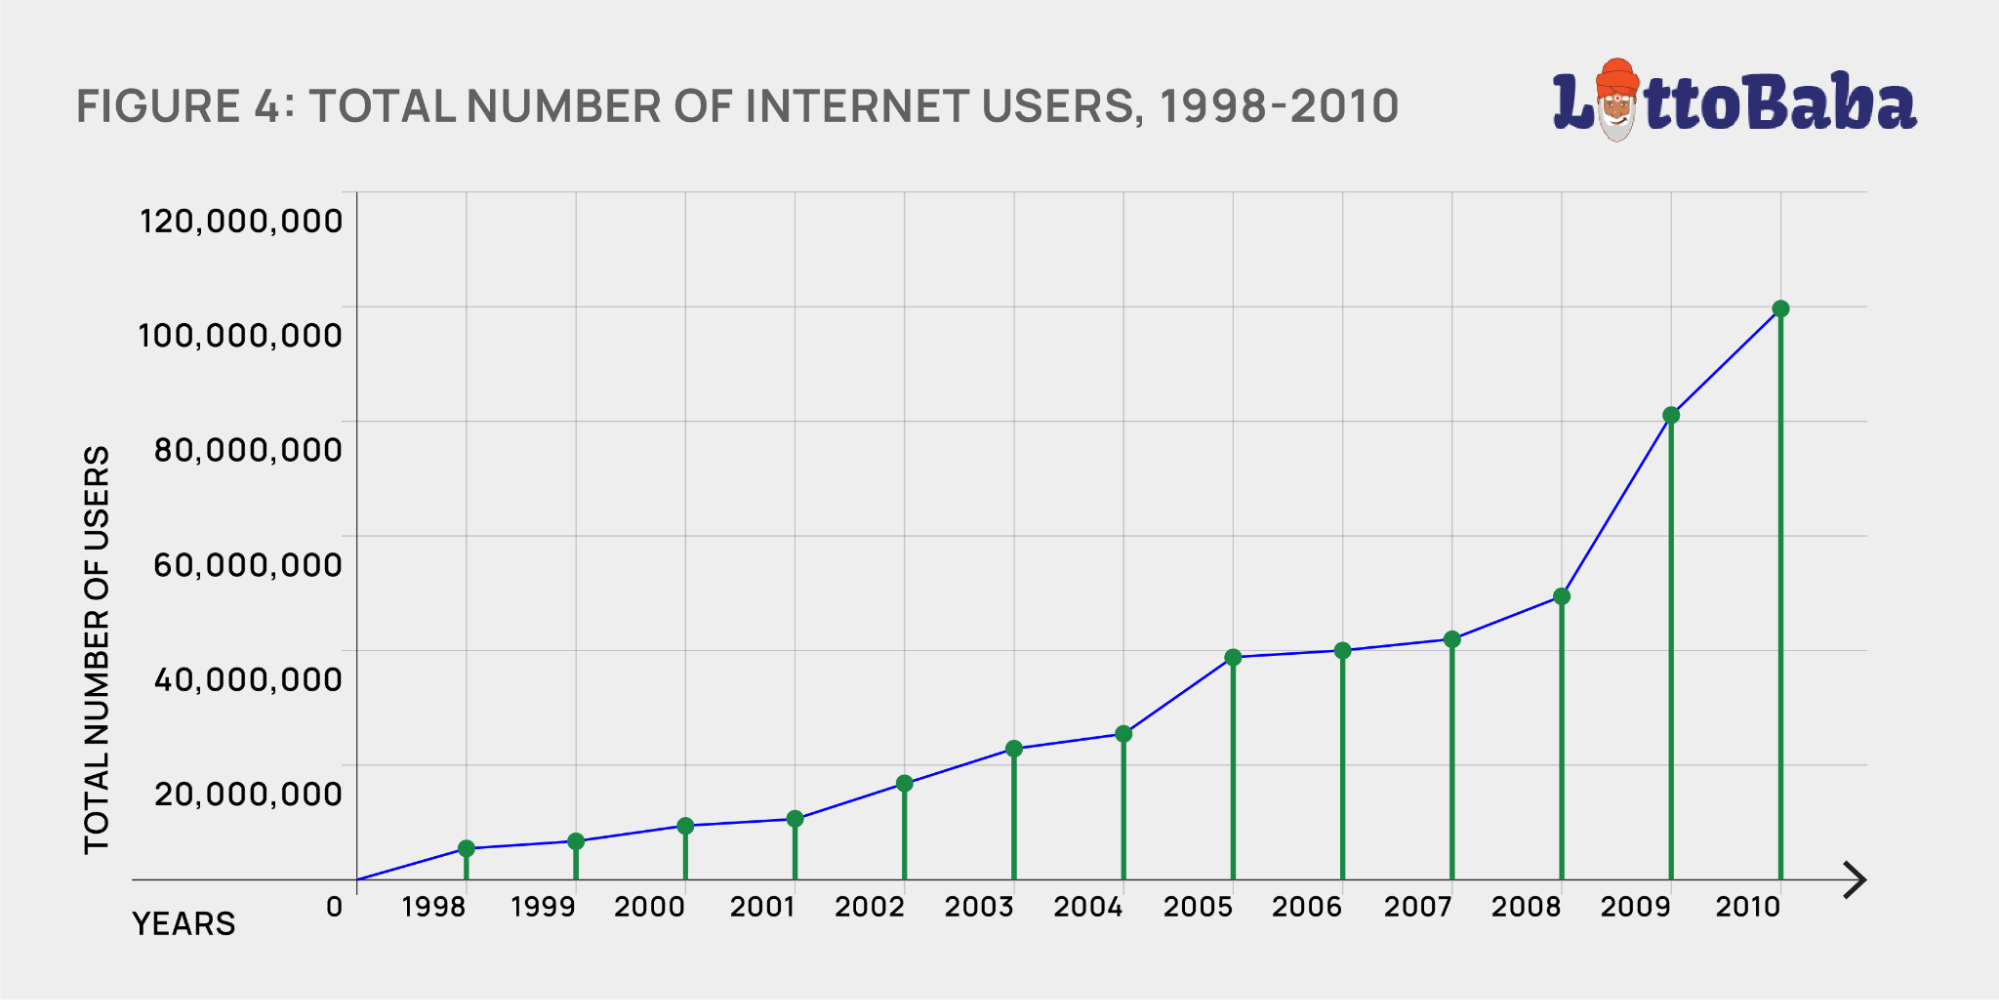 TOTAL NUMBER OF INTERNET USERS, 1998-2010